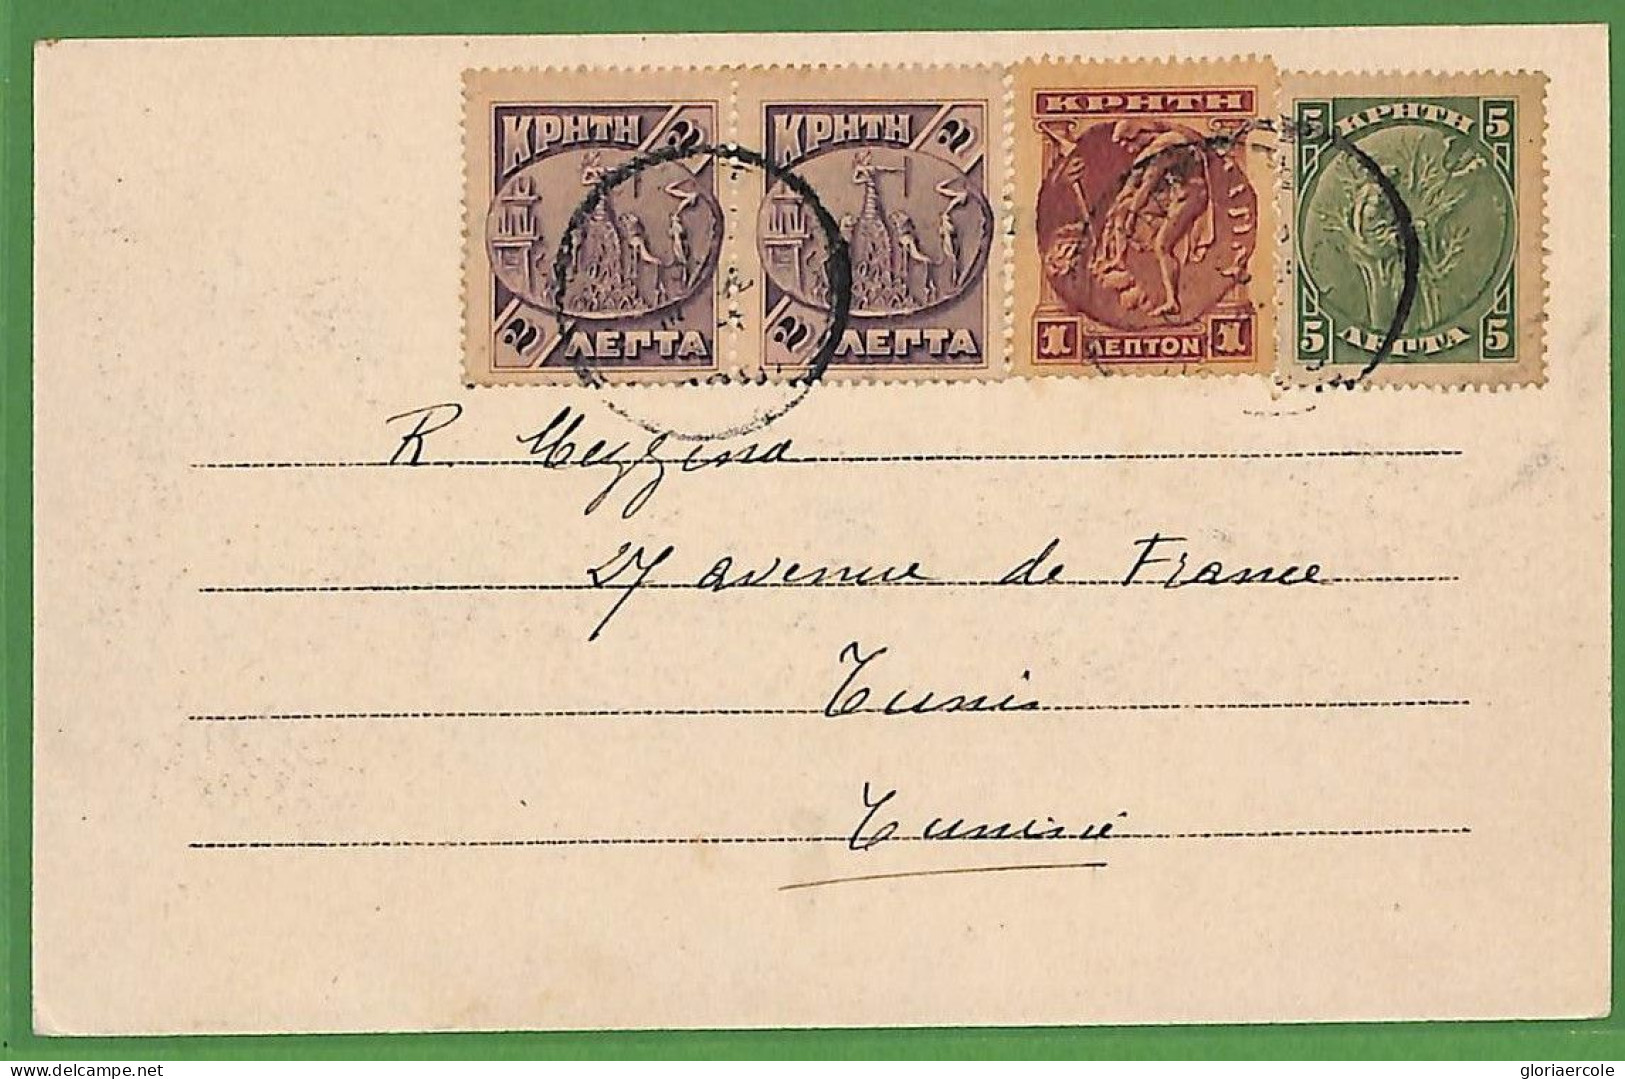 Ad0919 - GREECE - Postal History - Nice Franking On POSTCARD To TUNISIA ! 1900's - Lettres & Documents